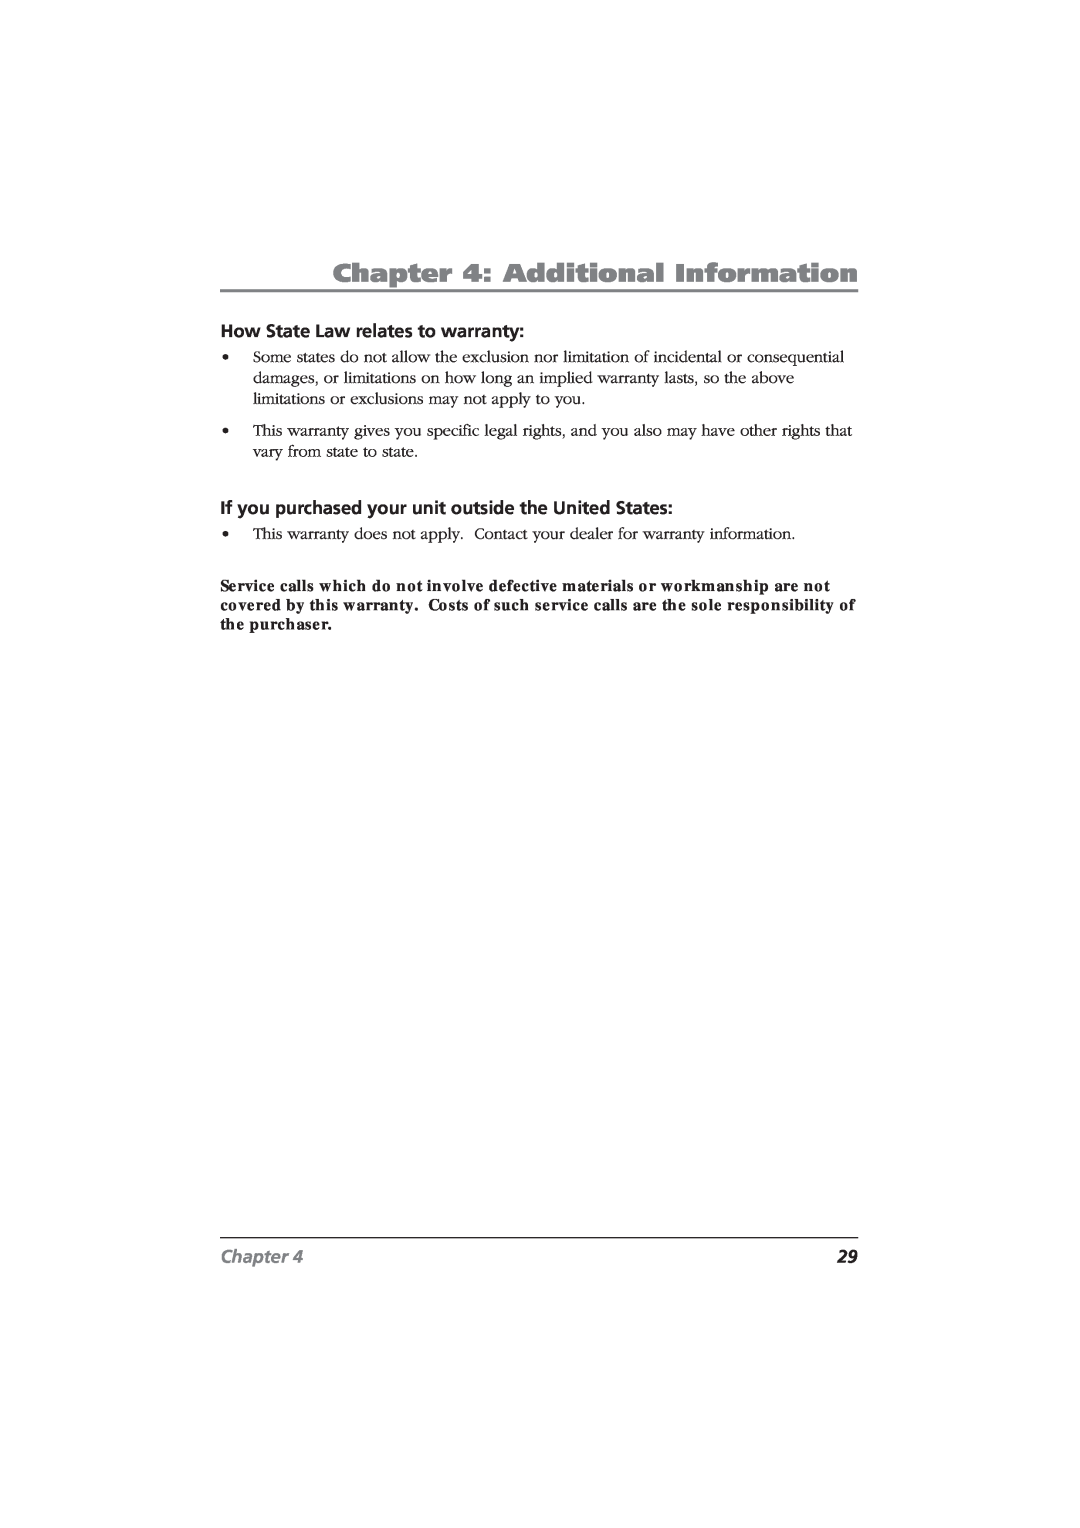 RCA CDRW120 manual Additional Information, How State Law relates to warranty, Chapter 